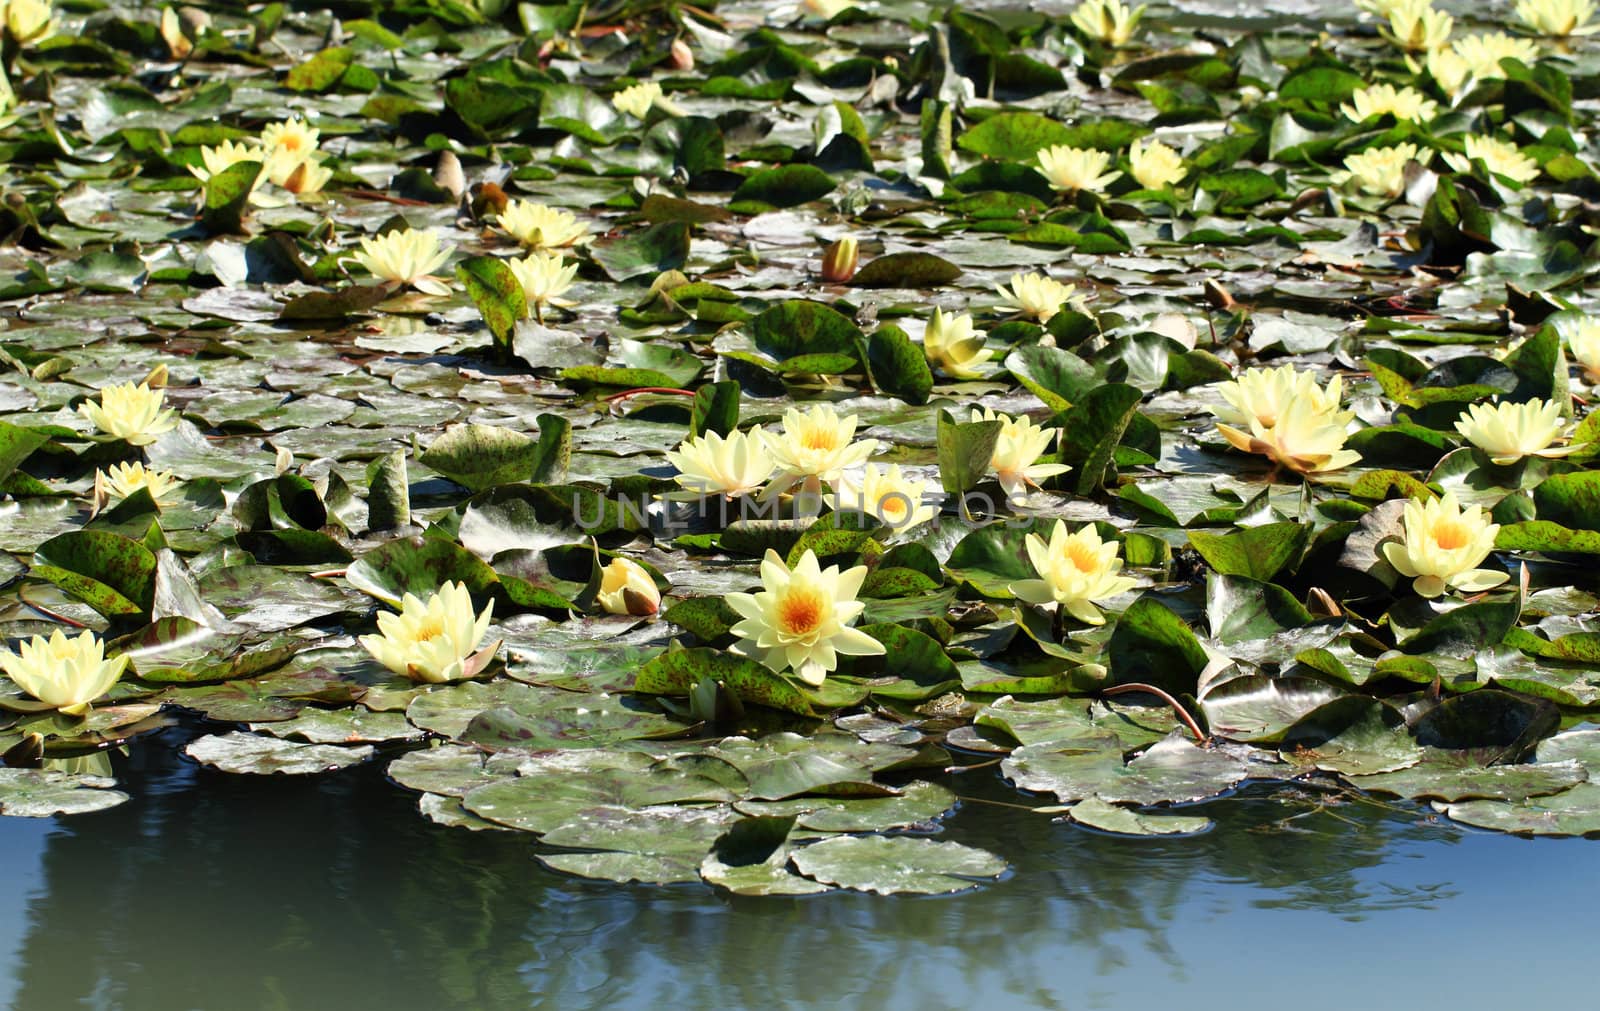 yellow water lily on the lake (Nymphaea alba)